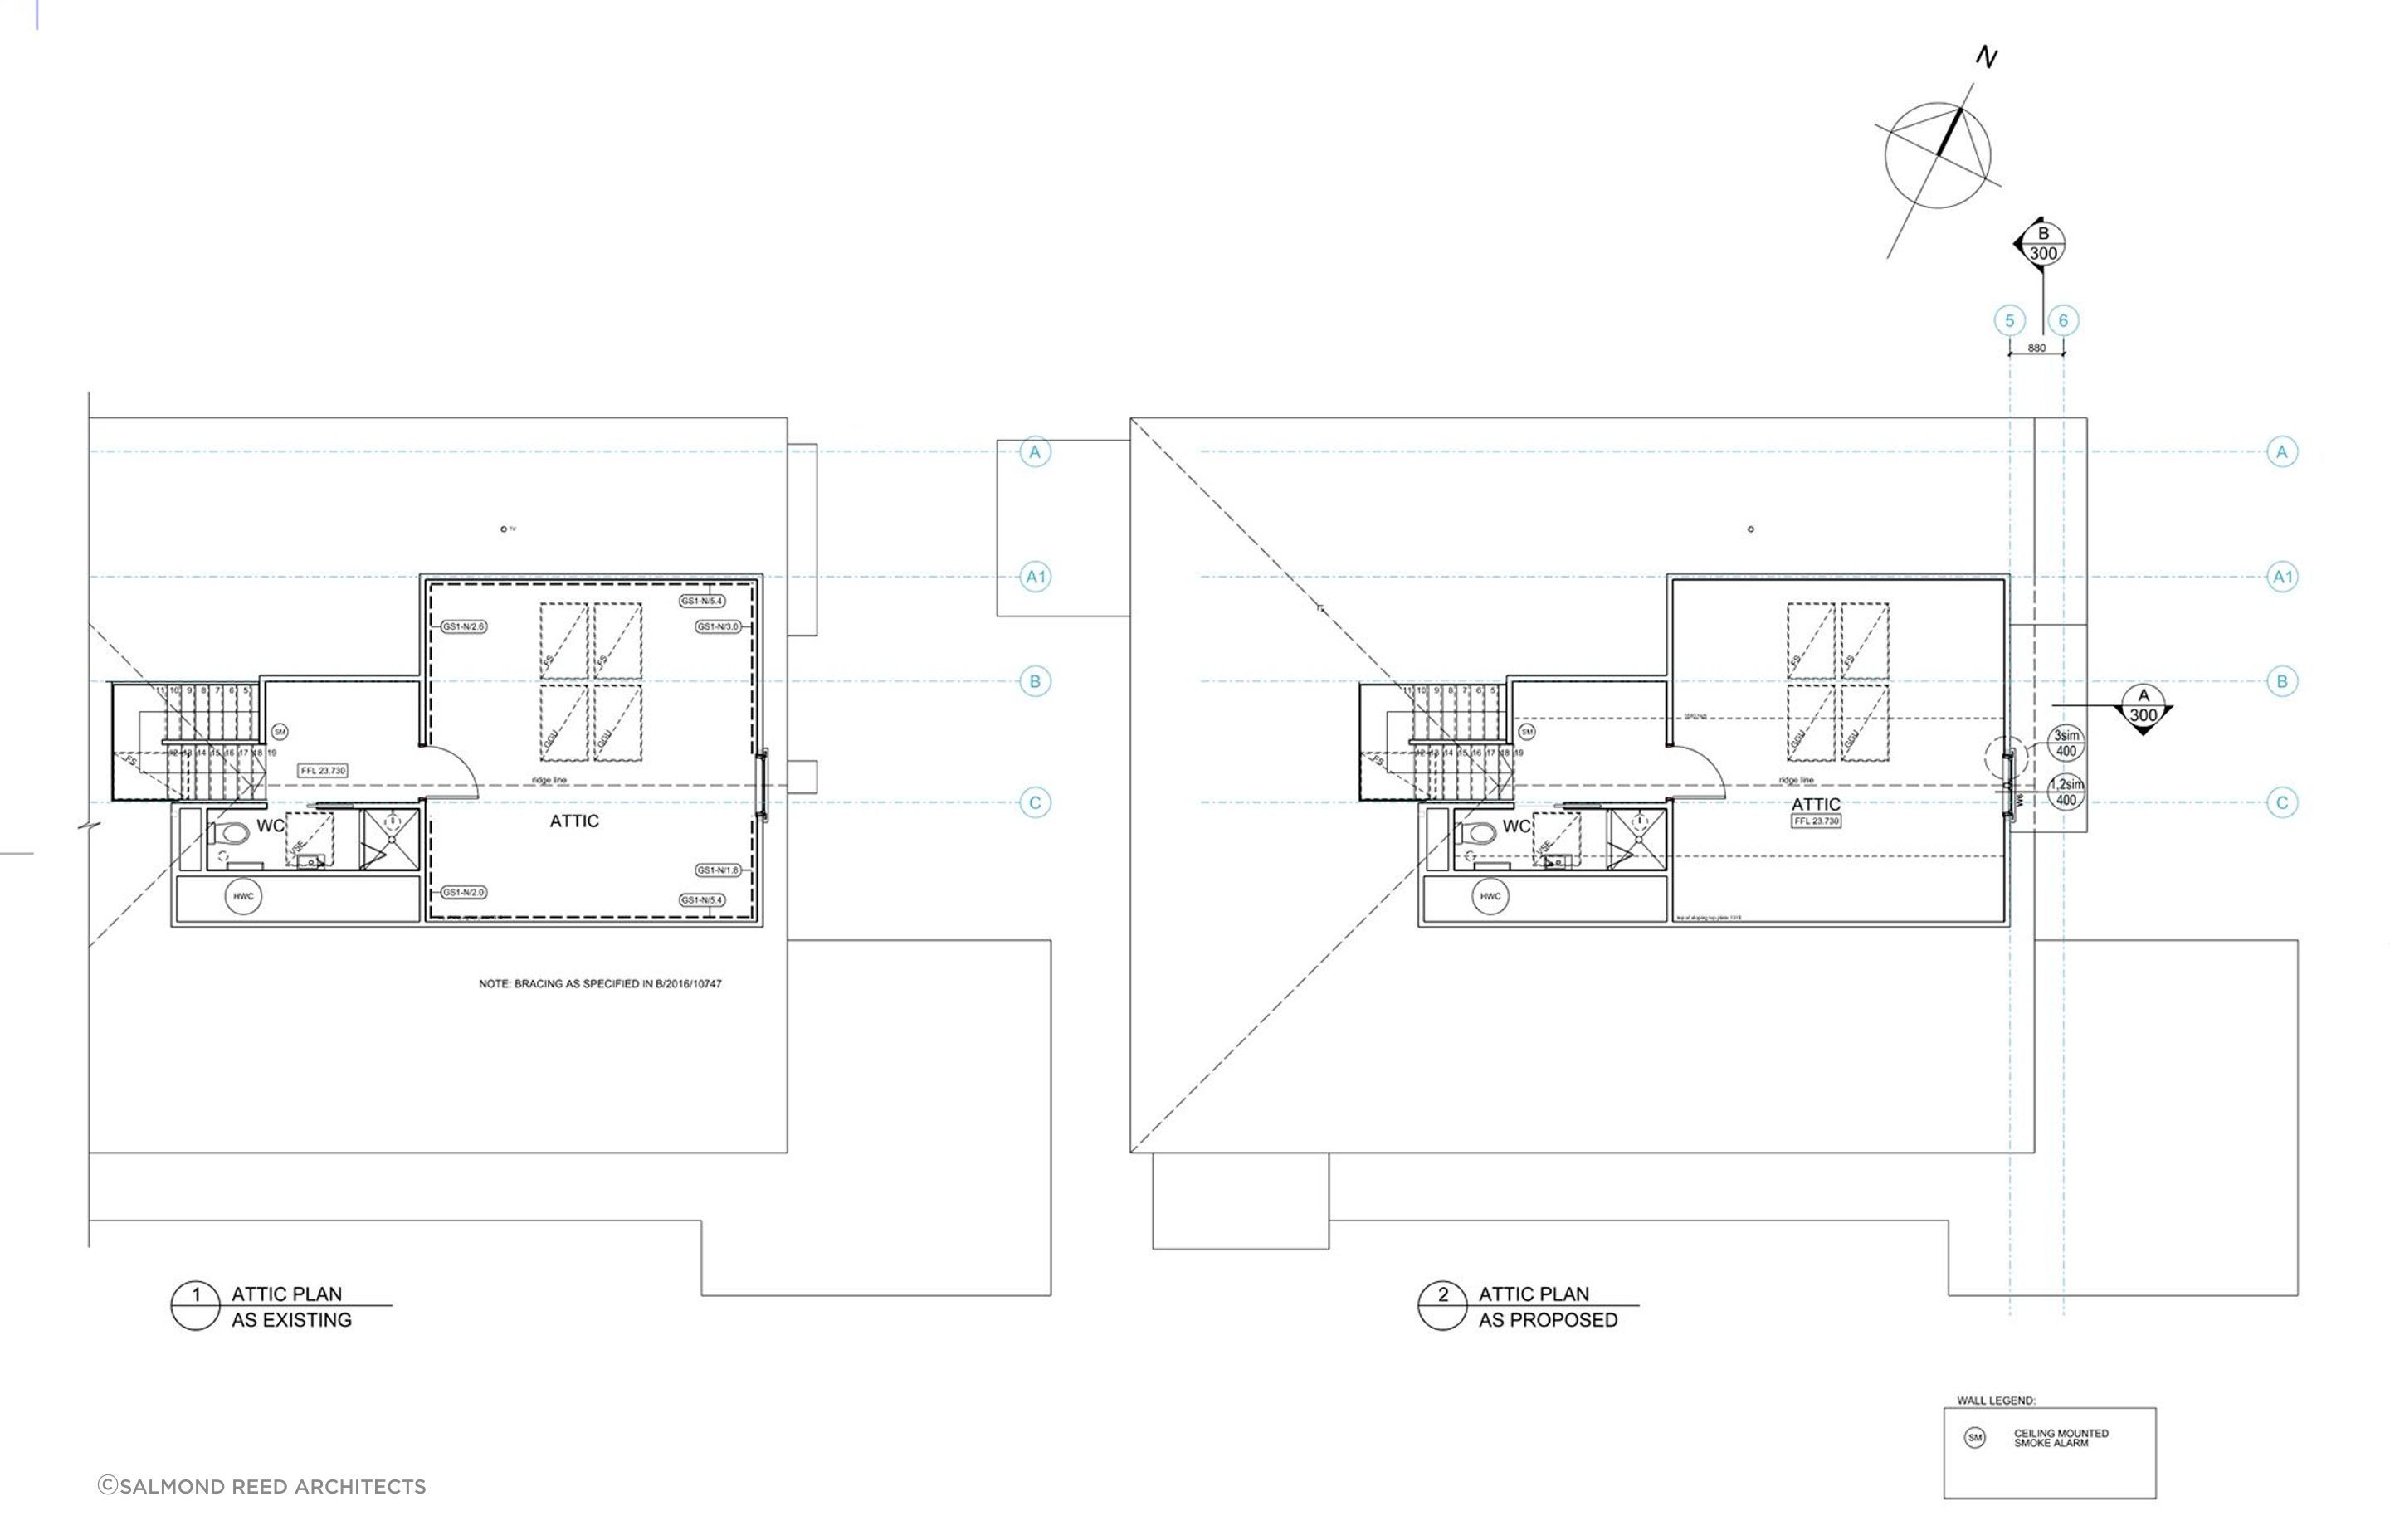 The existing and new attic plans, by Salmond Reed Architects.